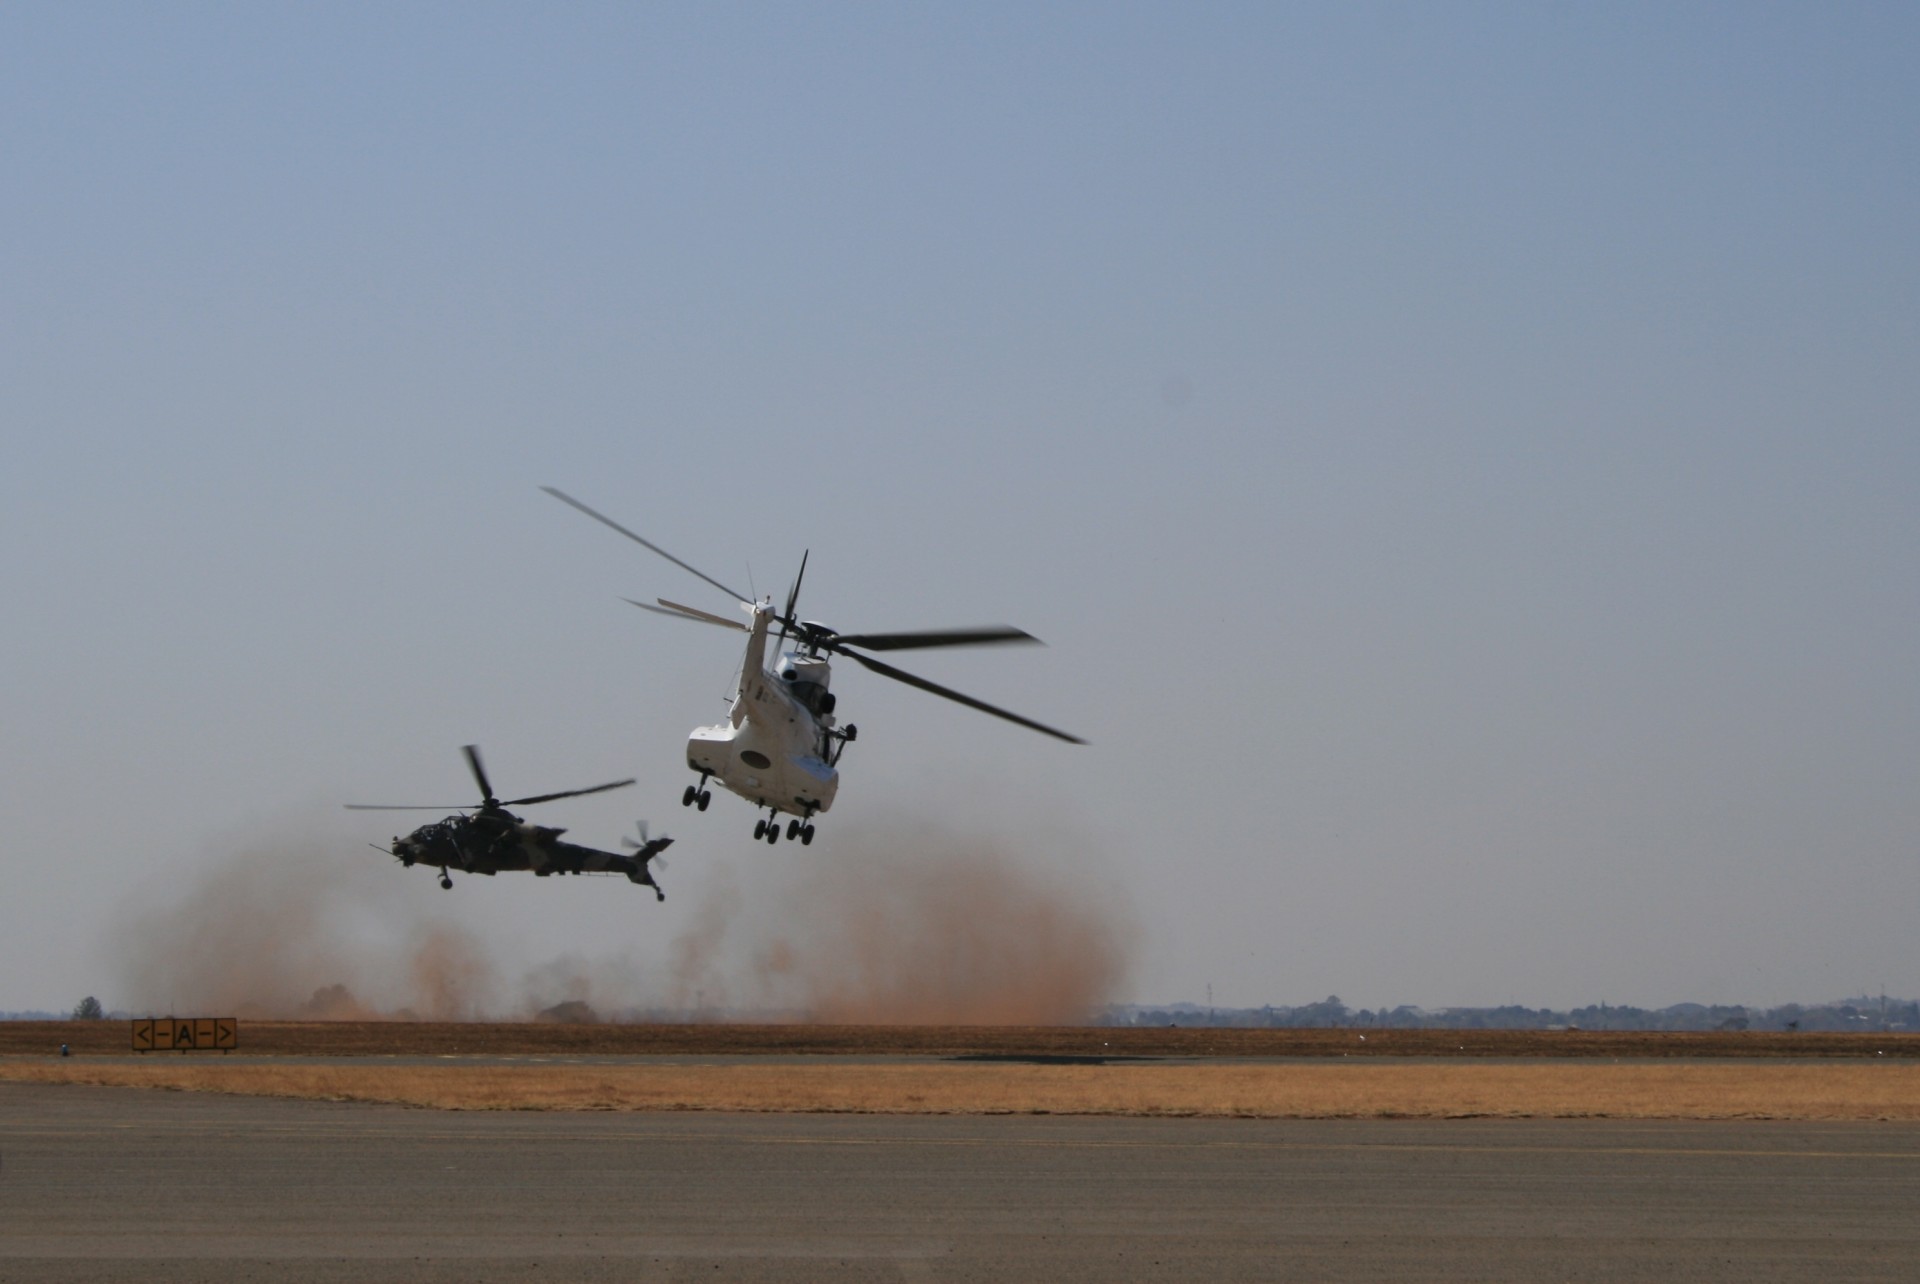 helicopters aerial display aviation free photo